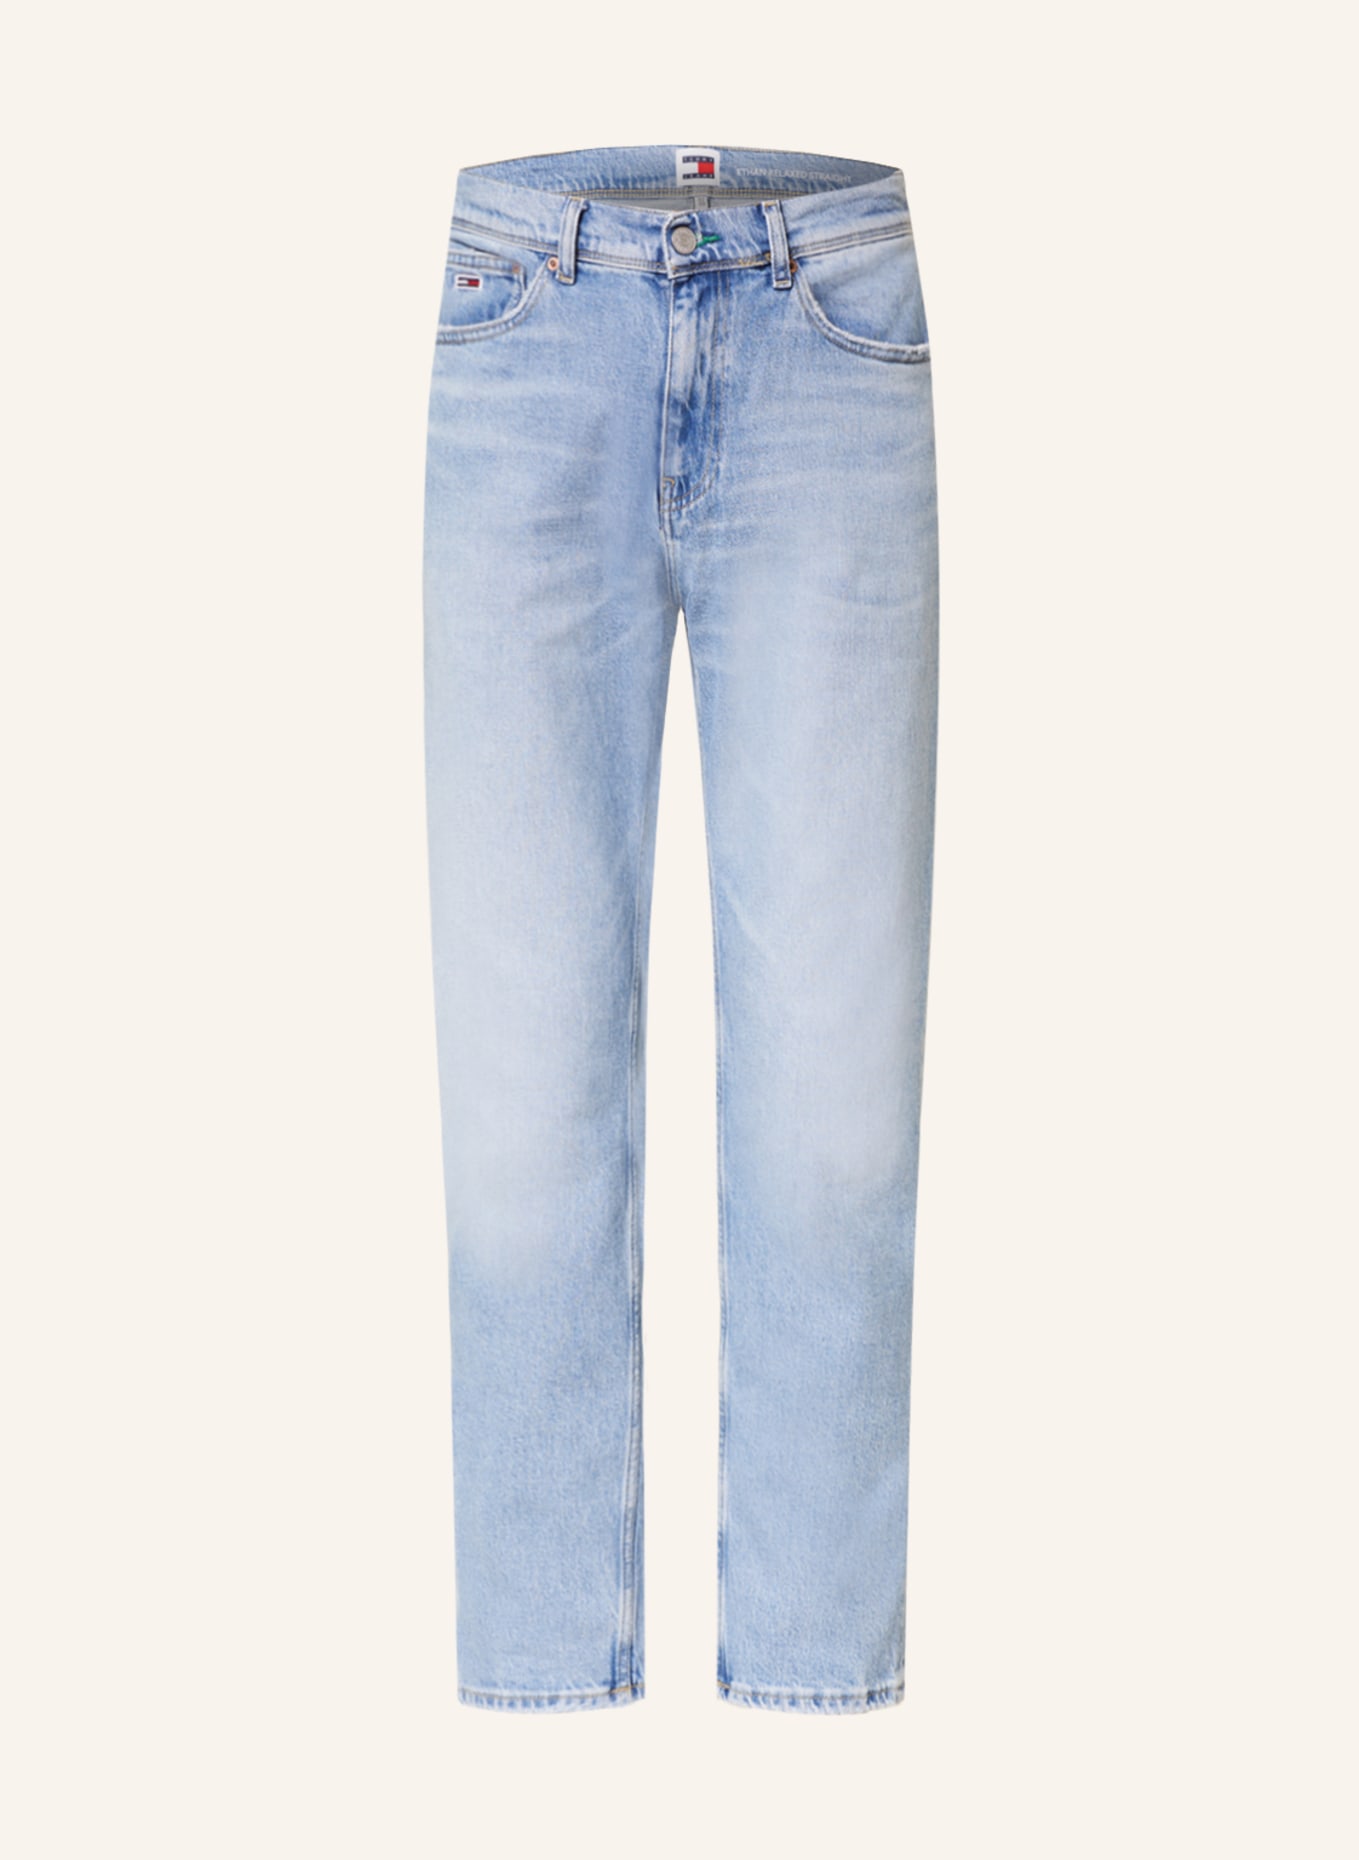 TOMMY JEANS Jeans ETHAN Straight Fit, Farbe: 1AB Denim Light (Bild 1)